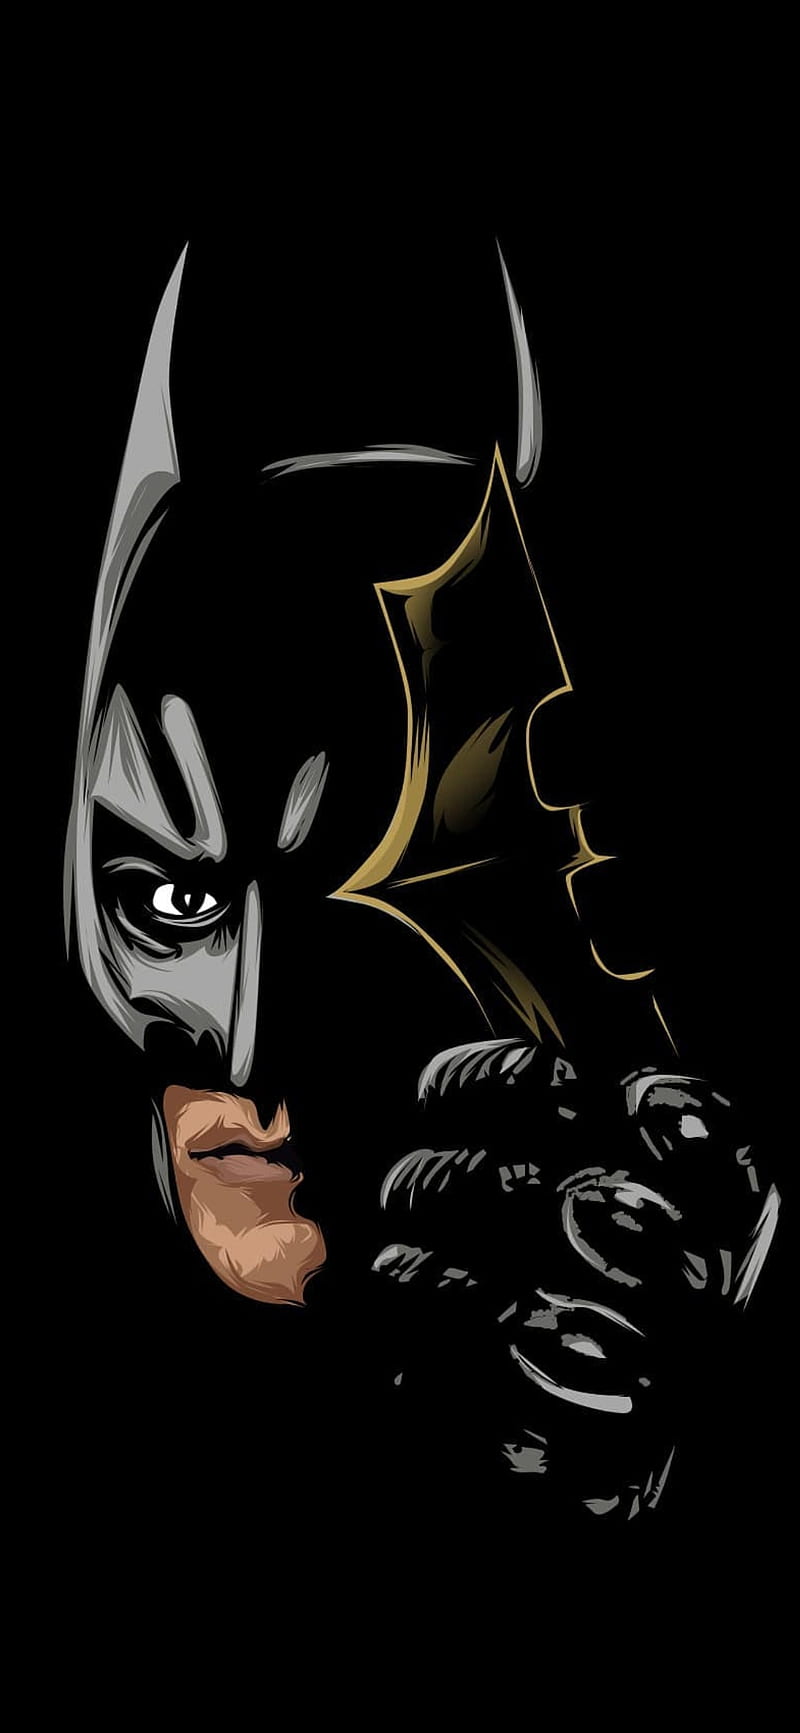 AMOLED BATMAN wallpaper by CONFLATEDESIGNS - Download on ZEDGE™ | 6695